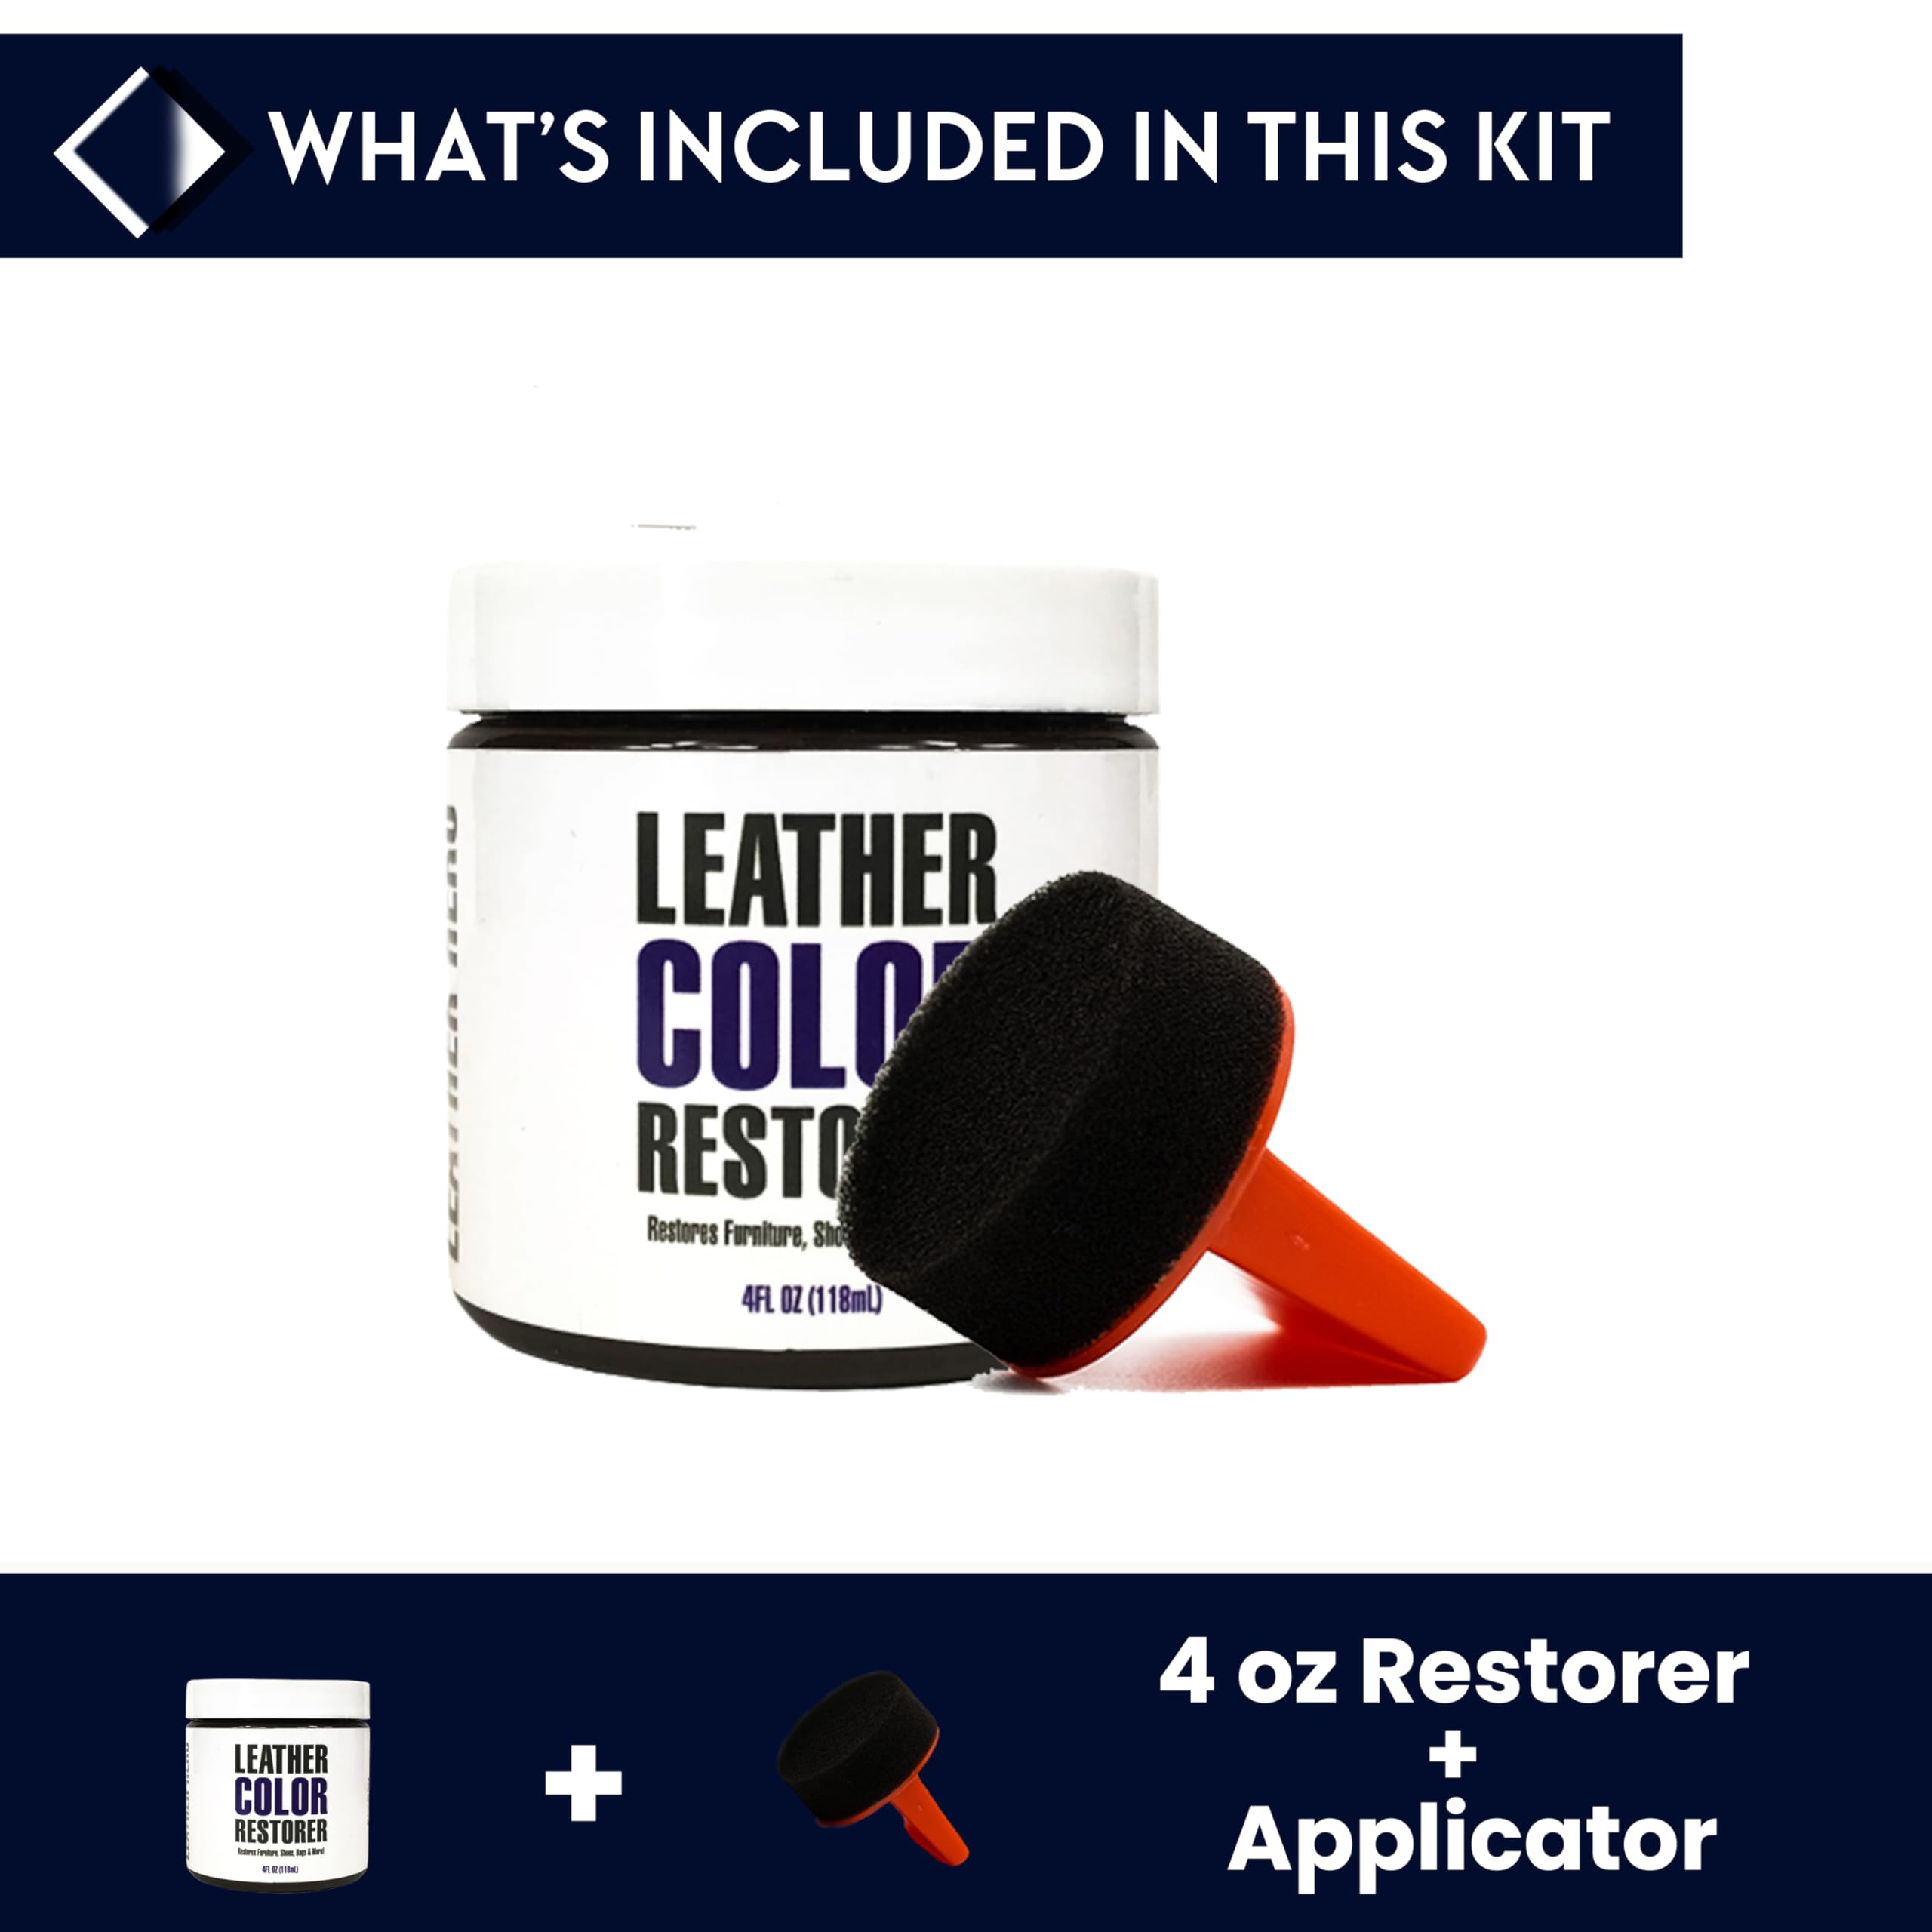 Leather Hero Leather color Restorer for couches, Leather Scratch Remover, Leather  couch Scratch Repair for Furniture